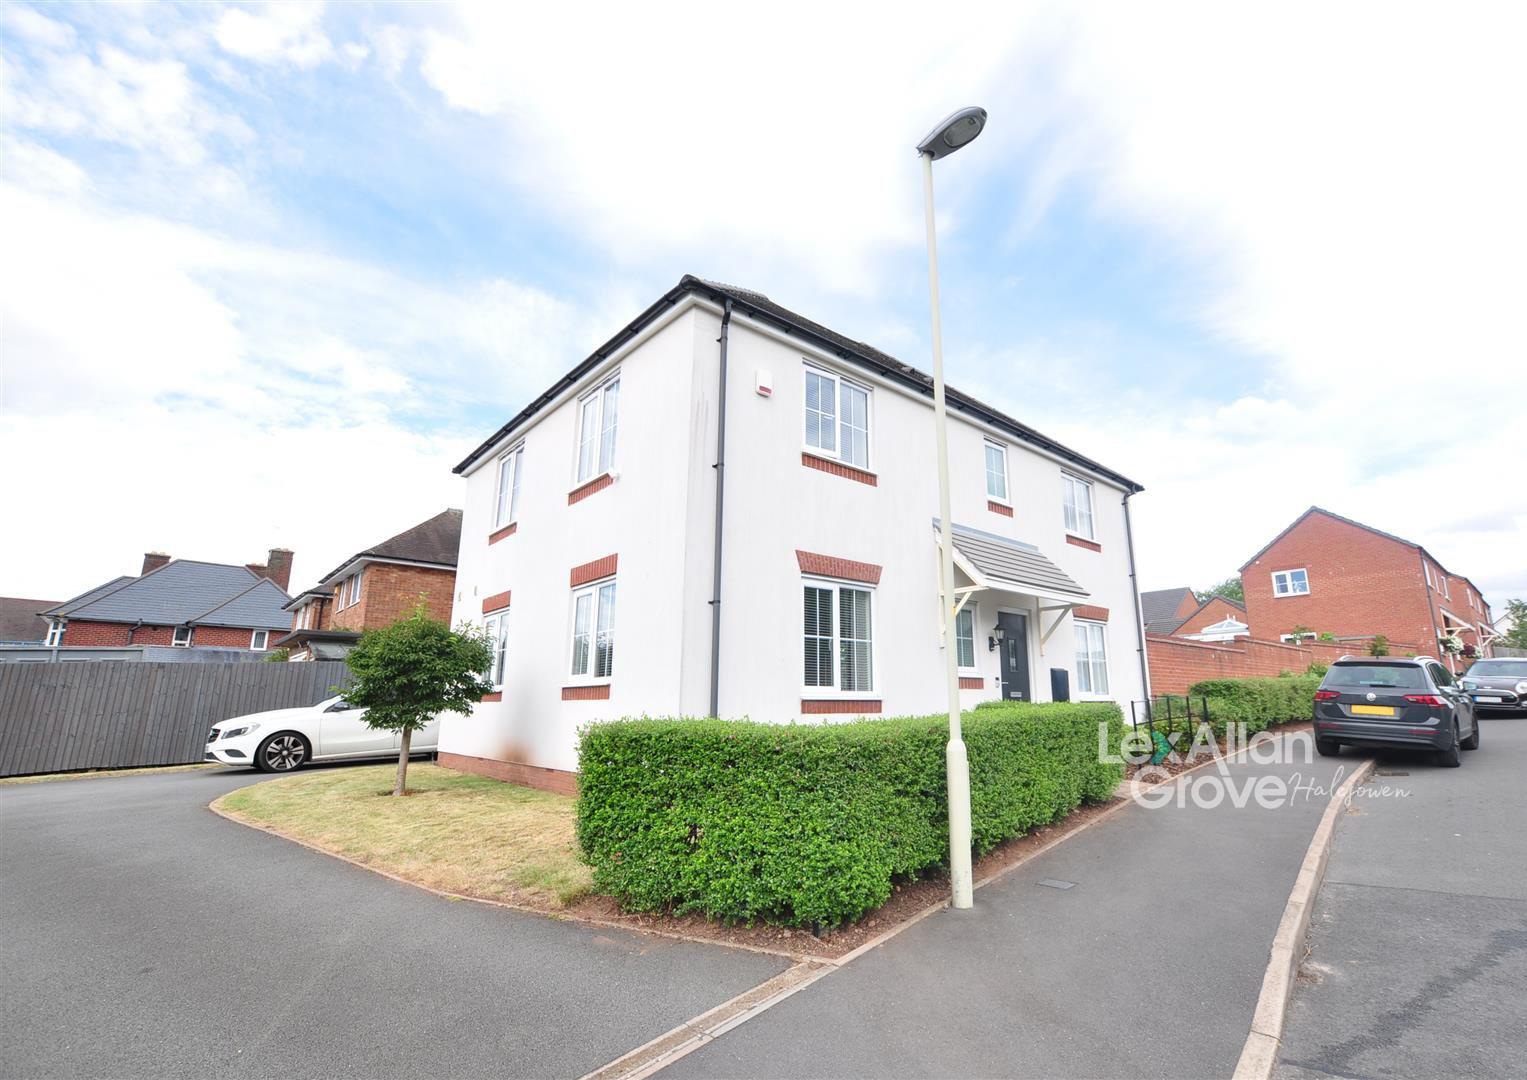 4 bed detached house for sale in Thatchers Barn Drive, Halesowen, B62 